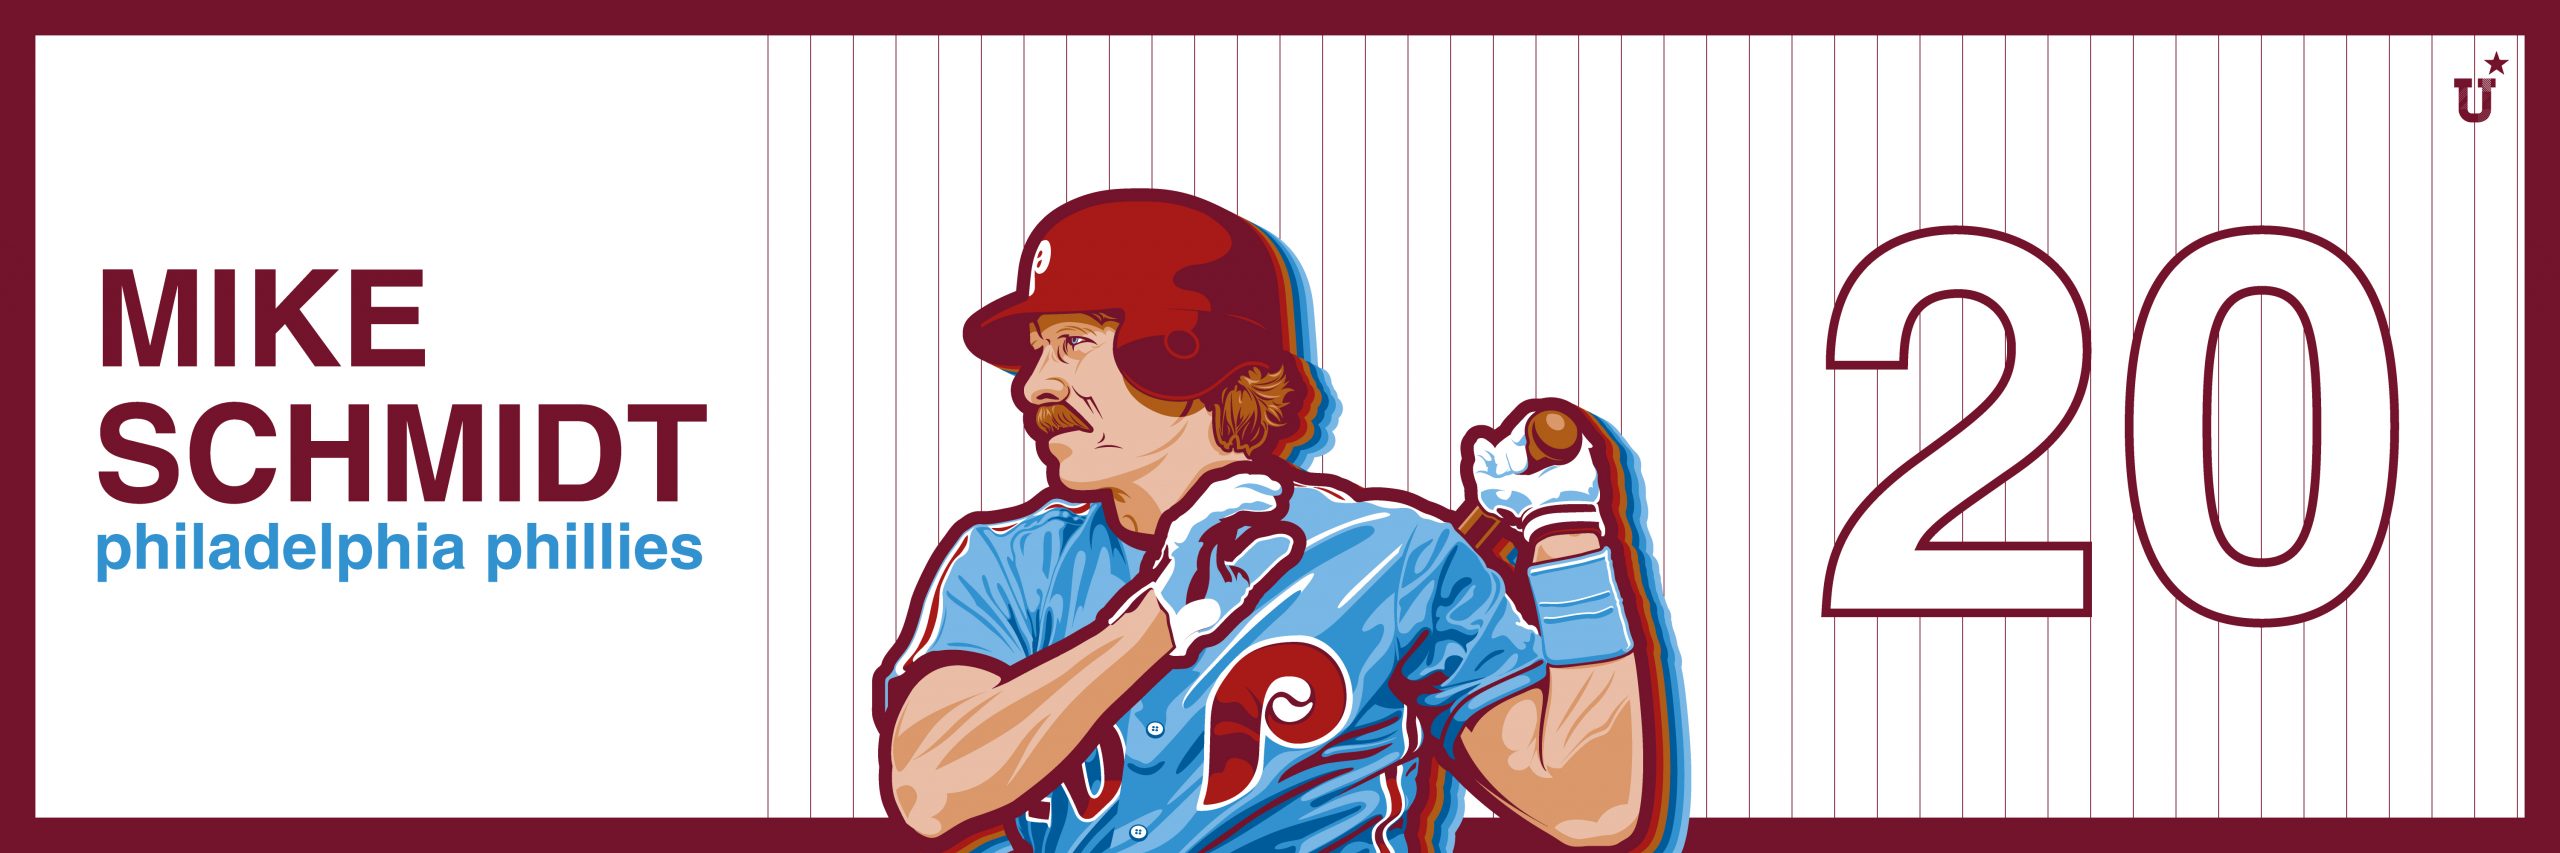 UNOFFICiAL ATHLETIC  Mike Schmidt Poster Design